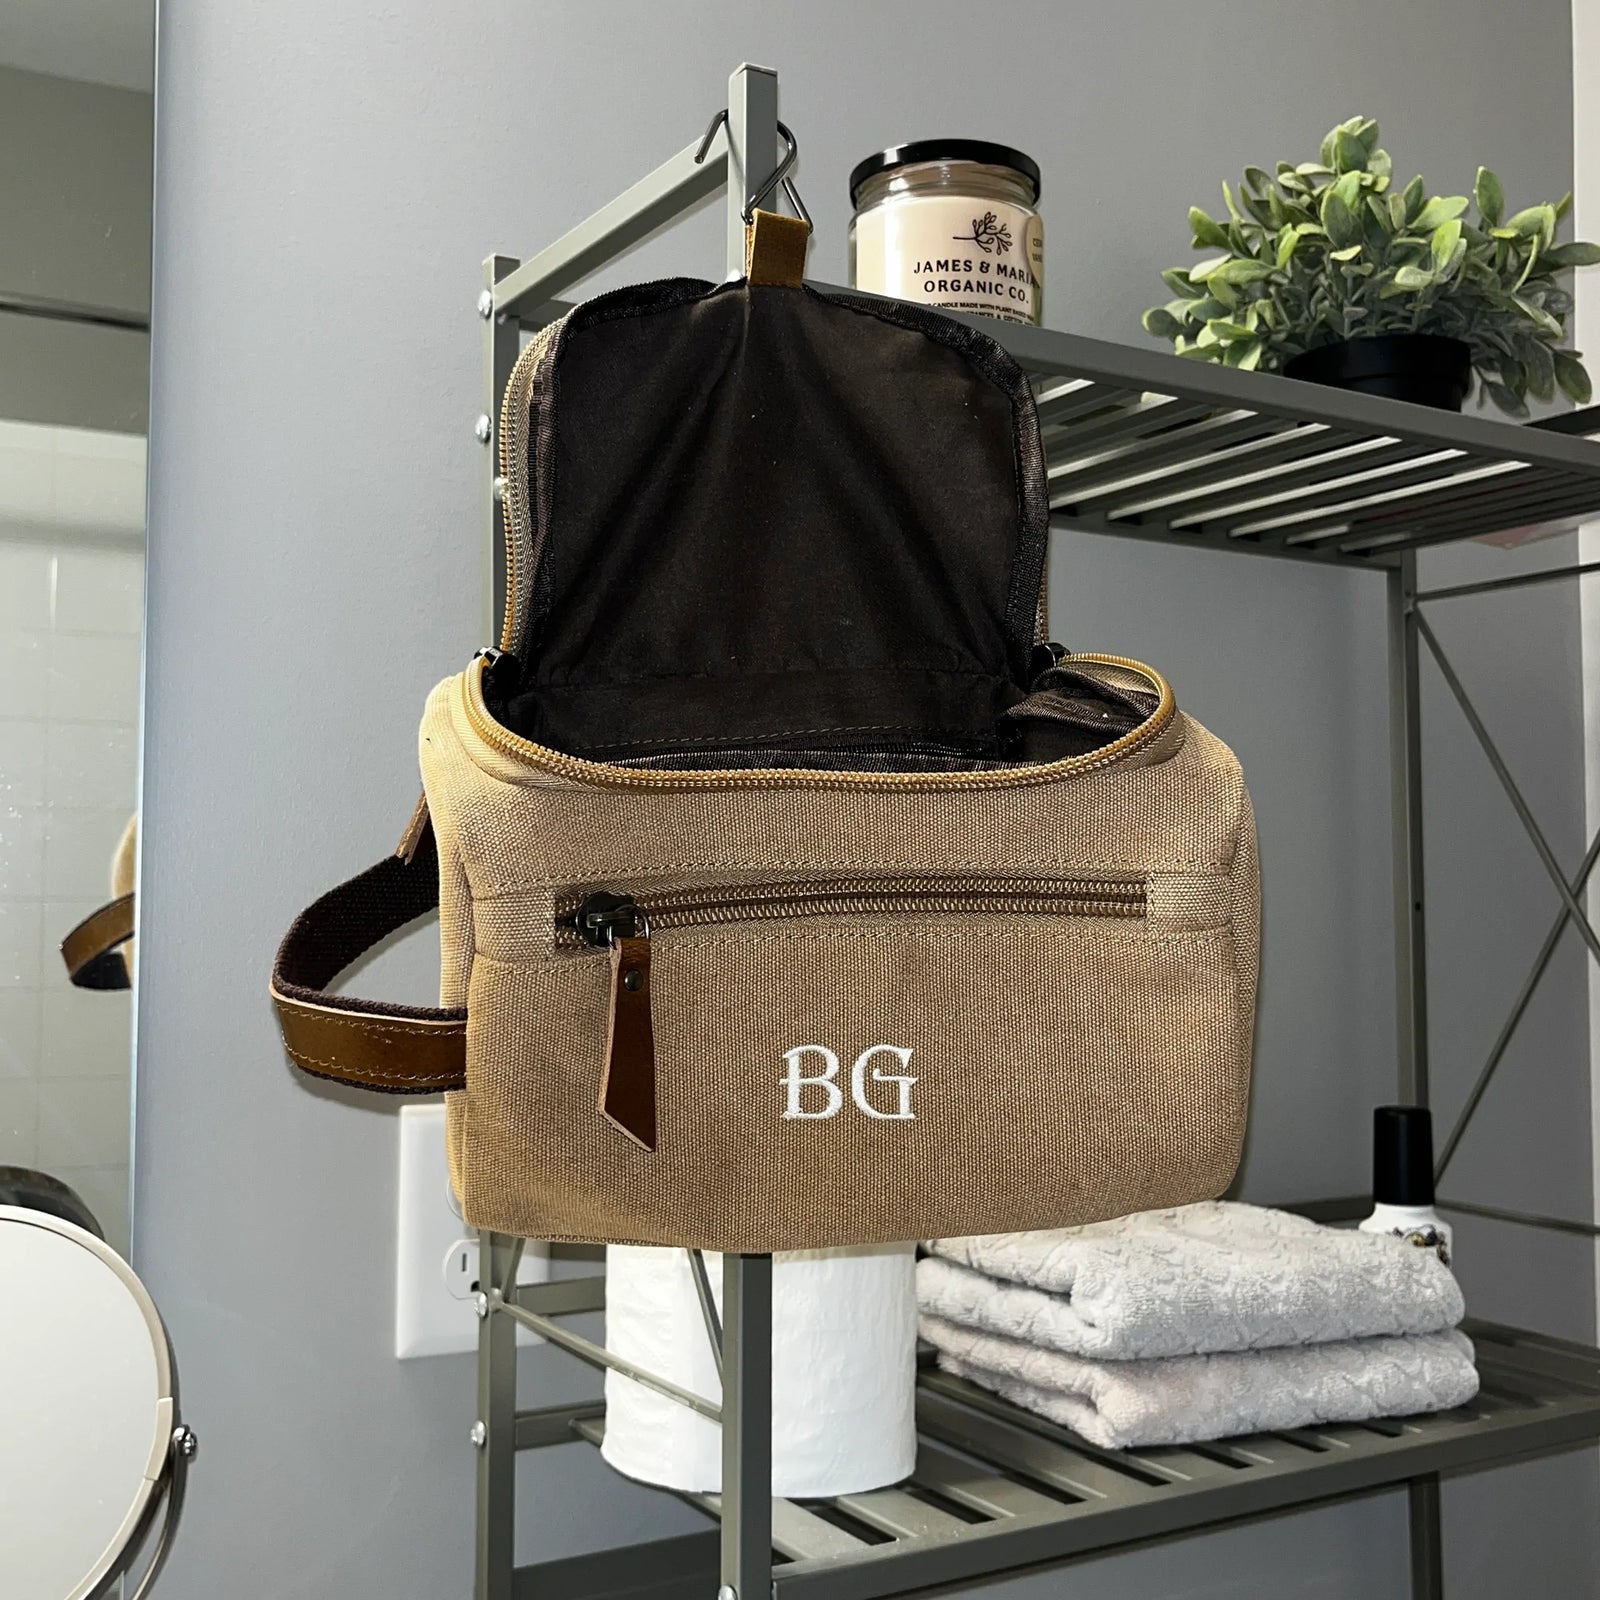 Personalized Canvas Toiletry Bag with Monogram - Groovy Guy Gifts